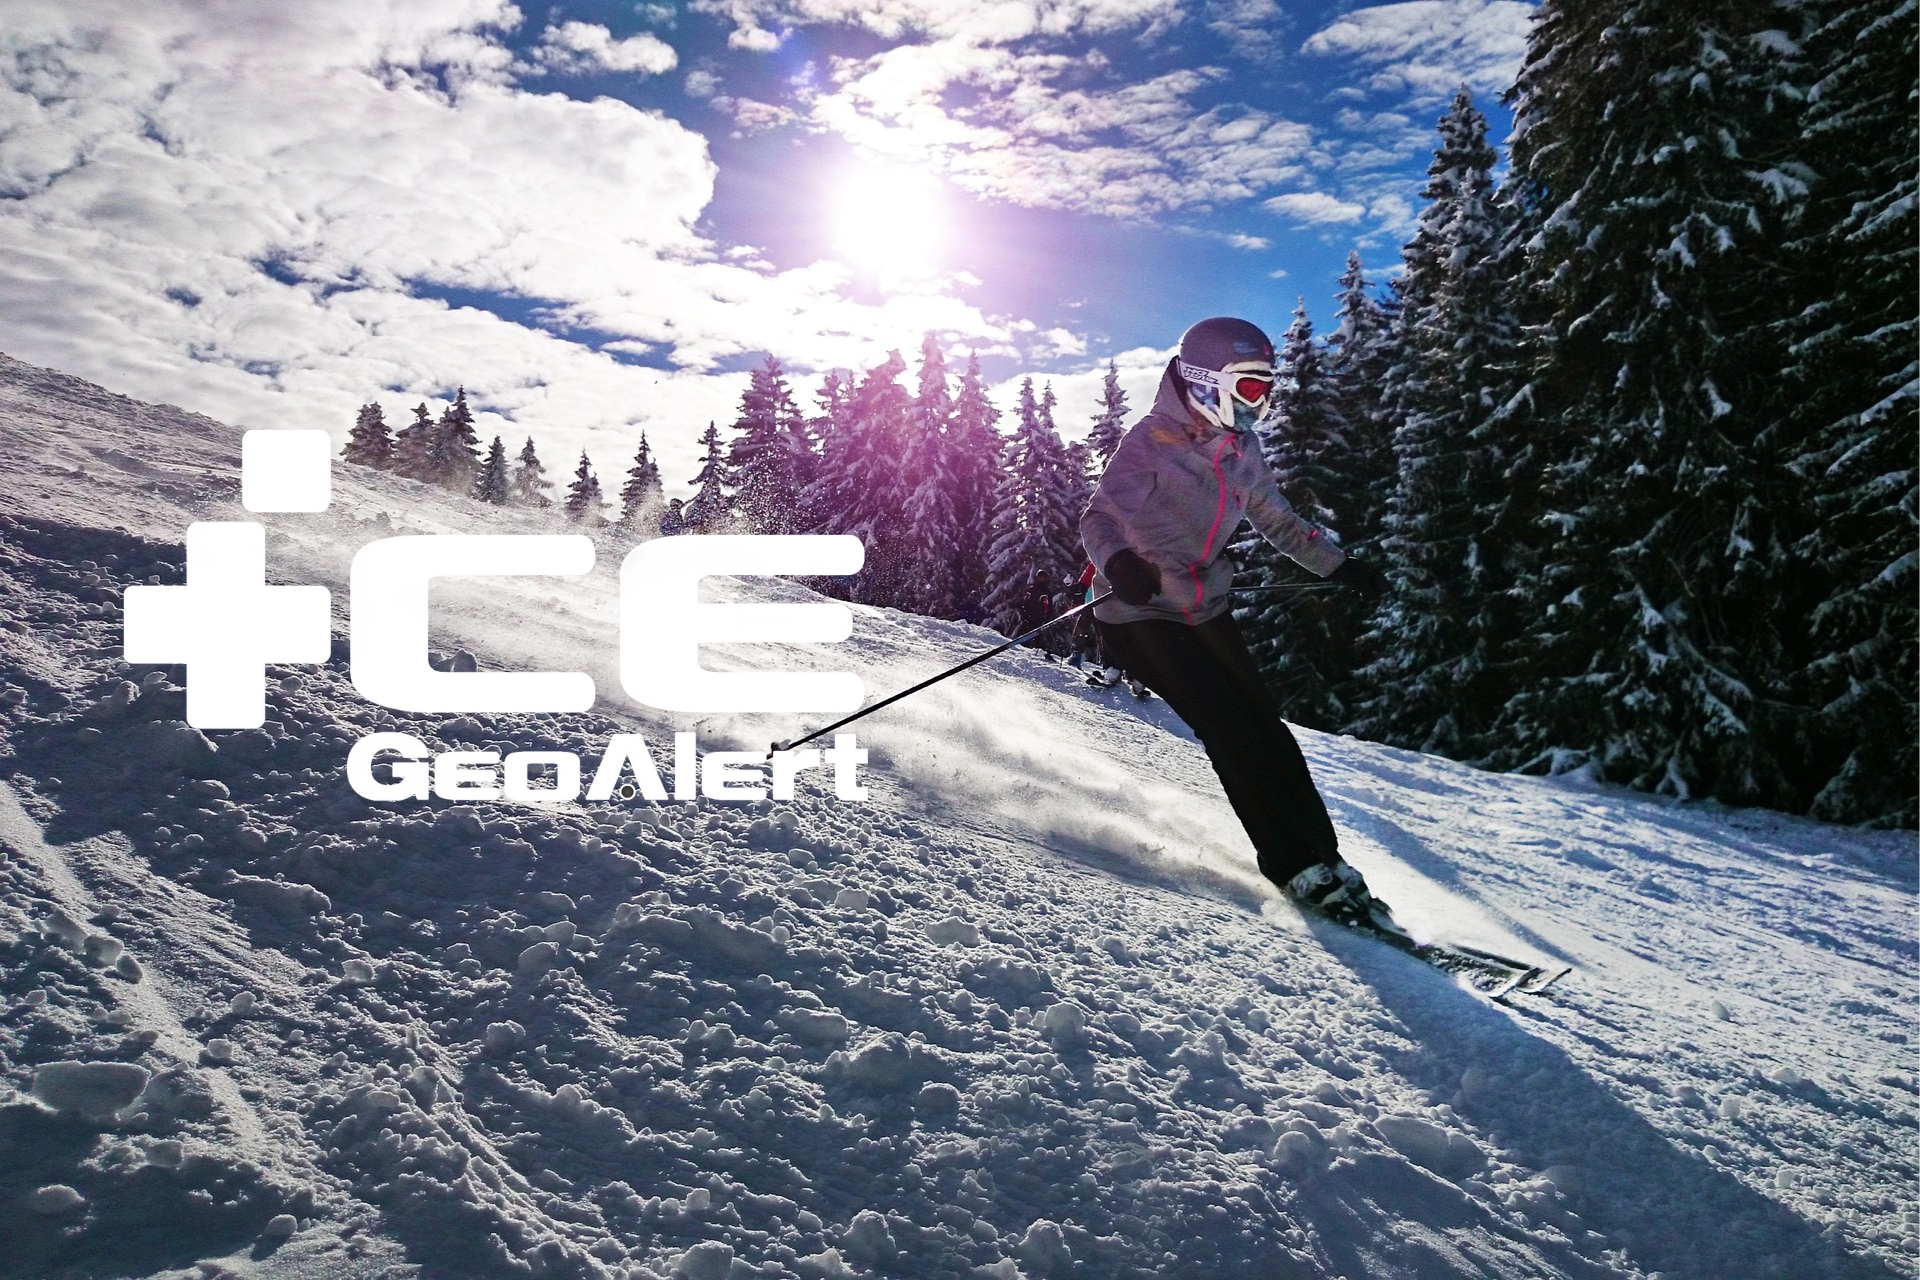 ICE GEOALERT aux sports d'hiver